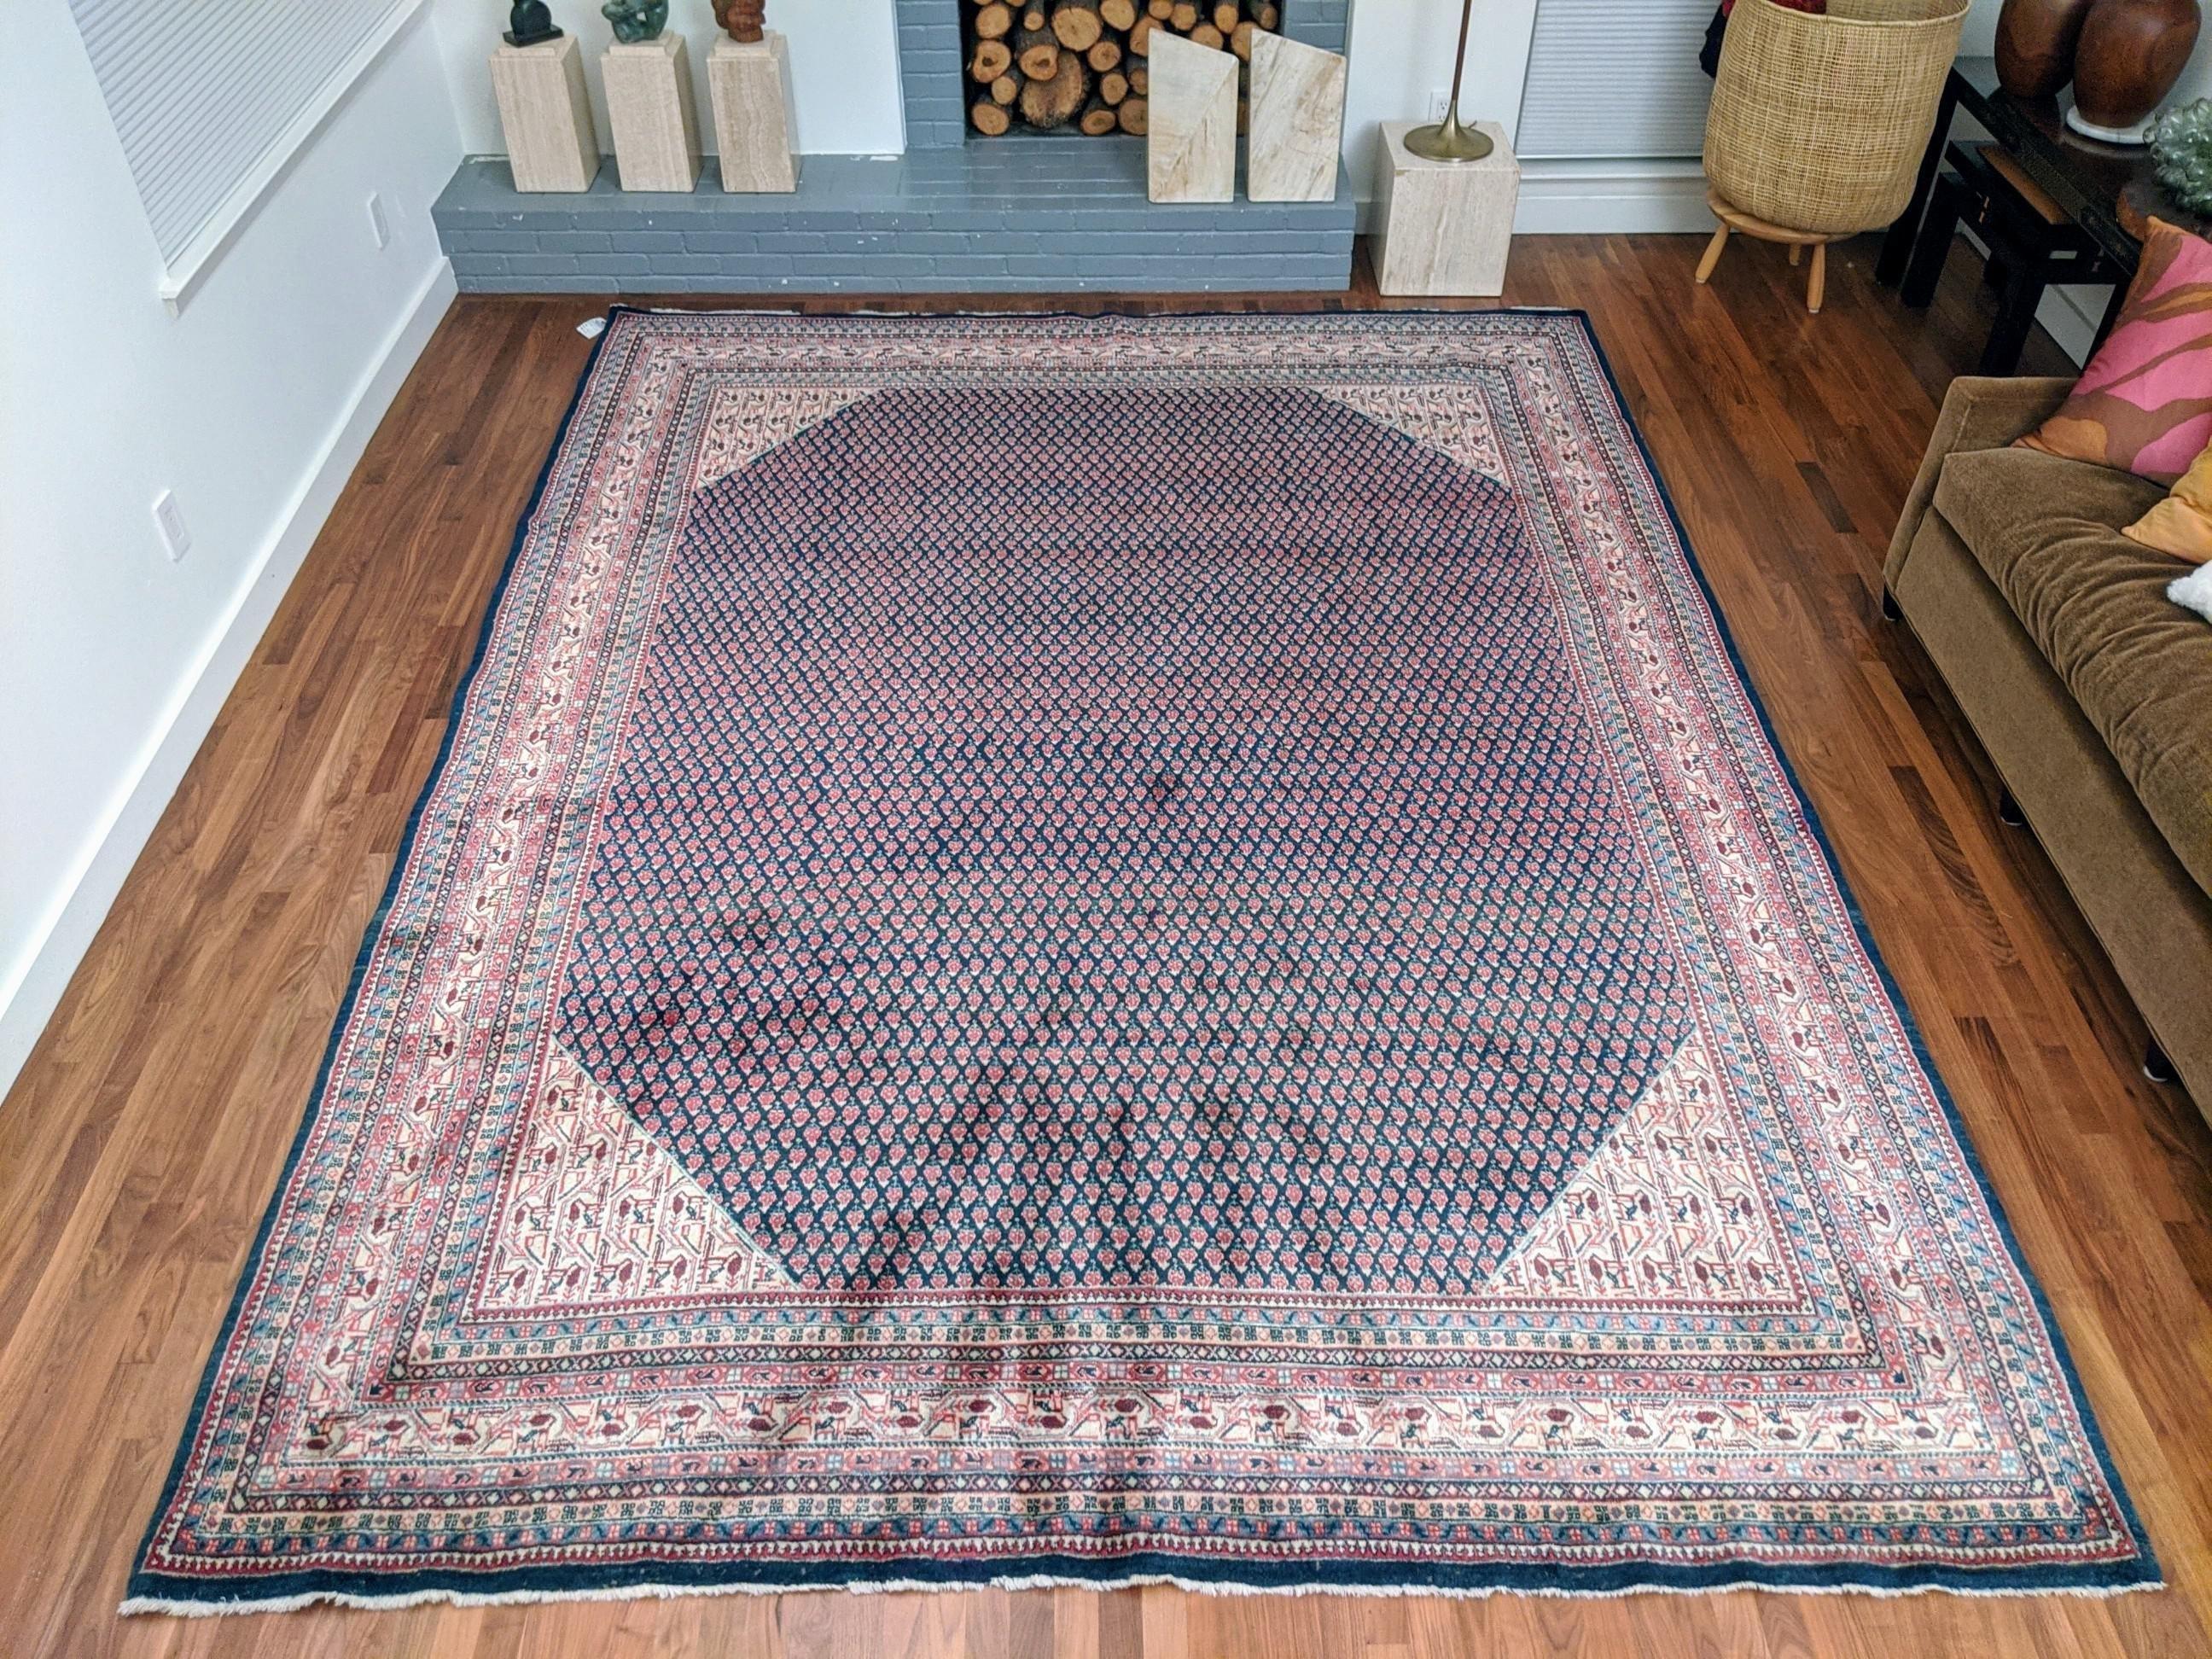 Authentic Handknotted Persian Mir 1940s Rug 9'x12' For Sale 3